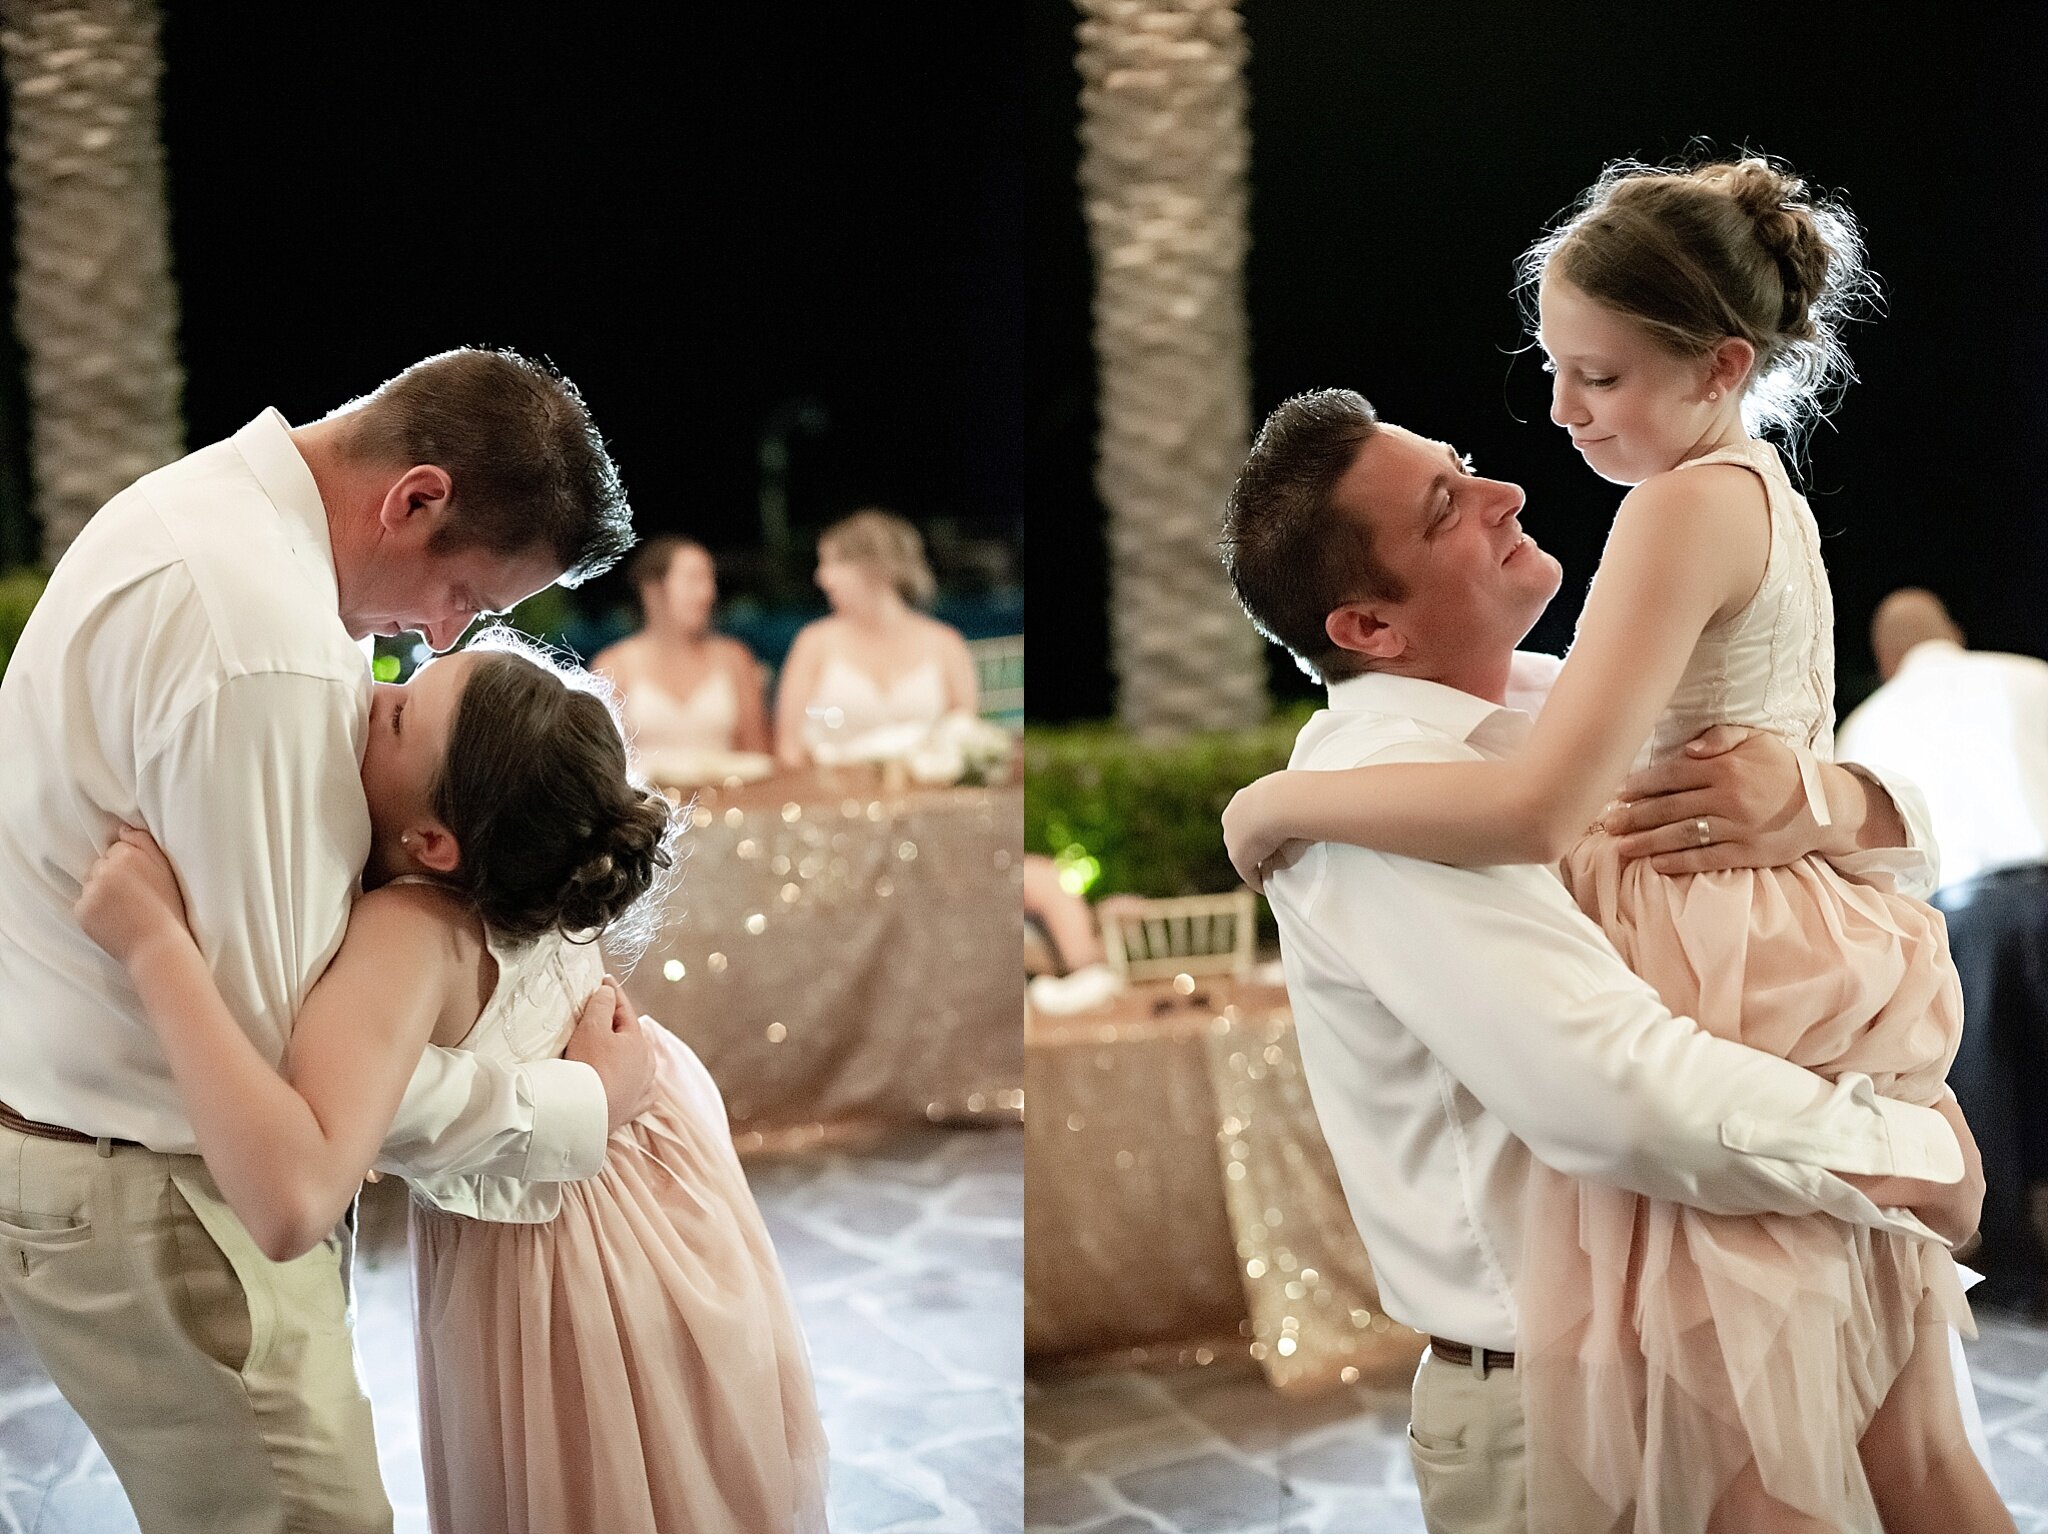 bride and groom dance with daughters at rooftop poolside wedding reception destination pueblo bonito sunset beach mexico